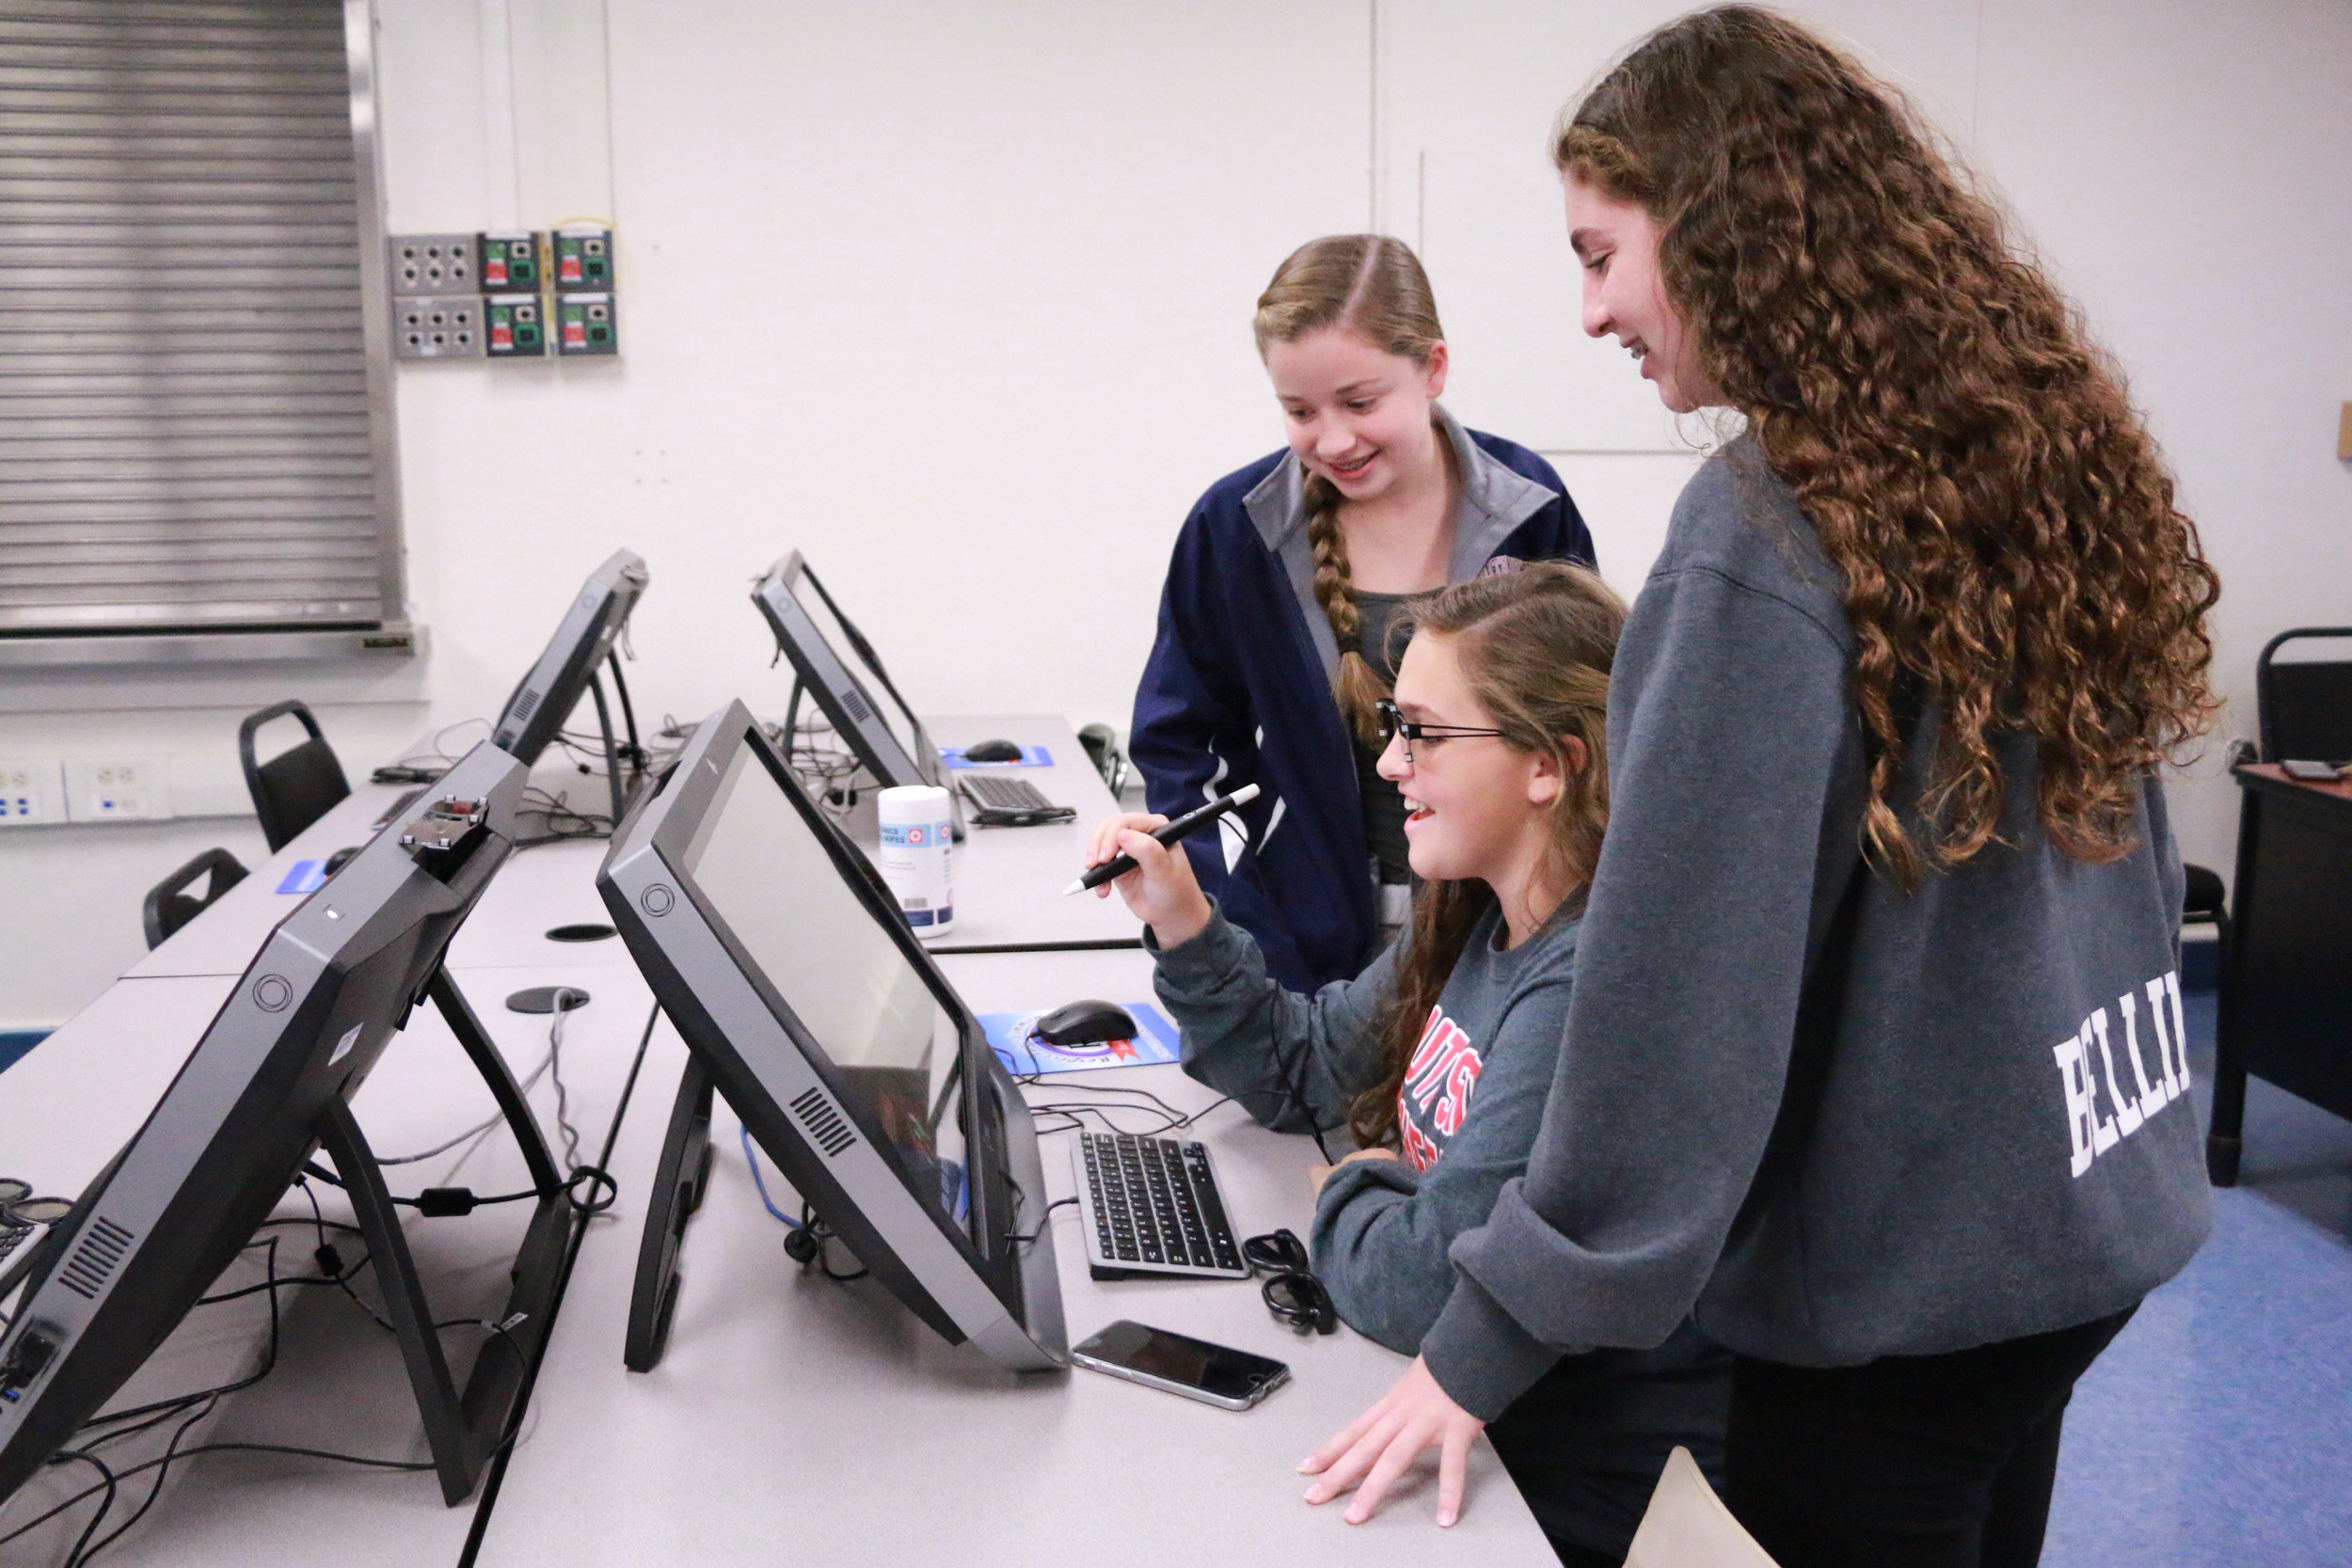 South Side High School students explored the district’s zSpace virtual-reality technology, which will be available for a second straight year.